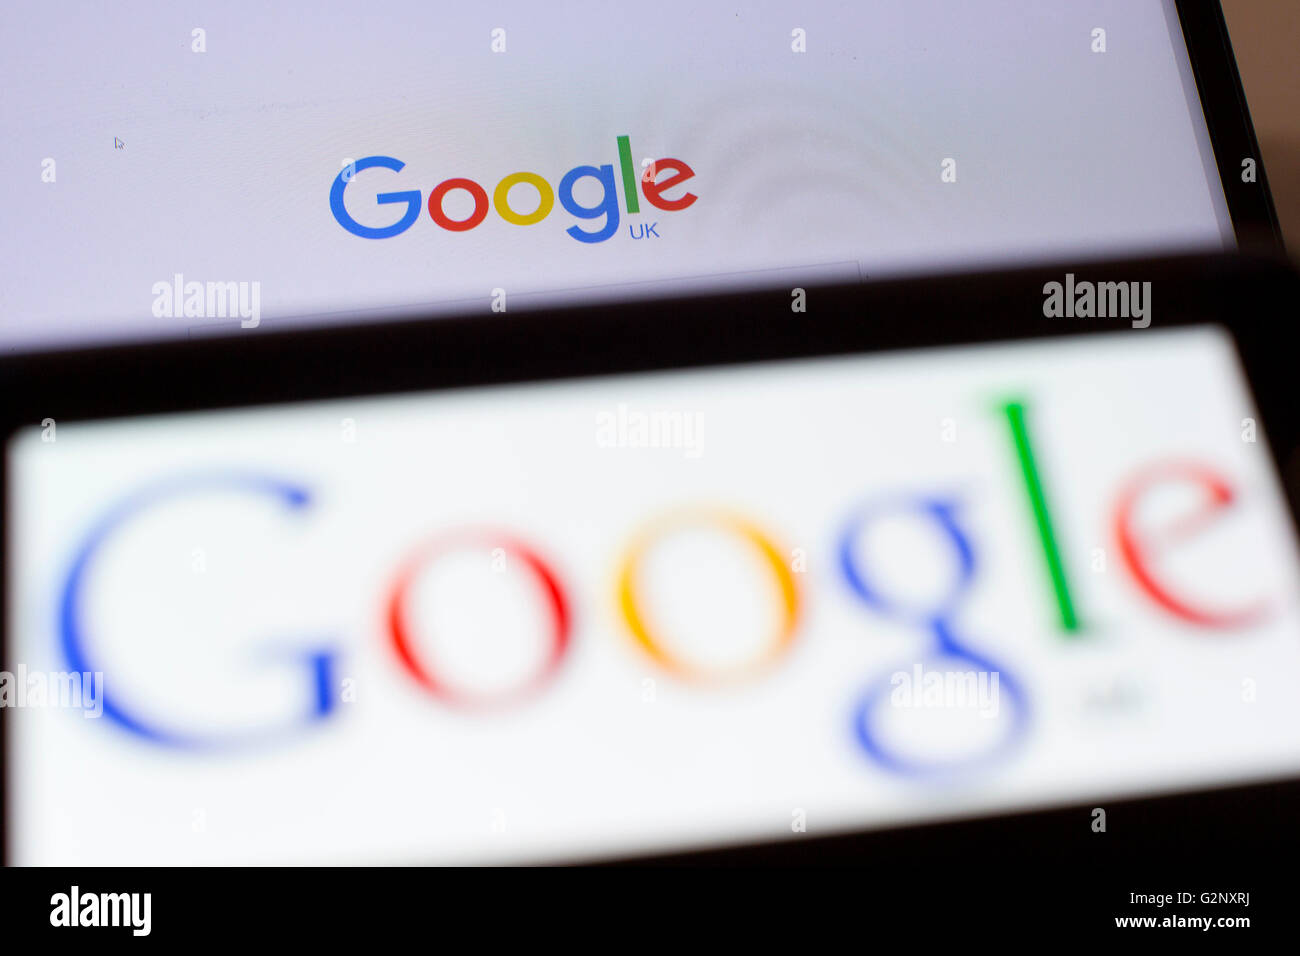 Google UK search engine logos are pictured on phone and laptop screens ...